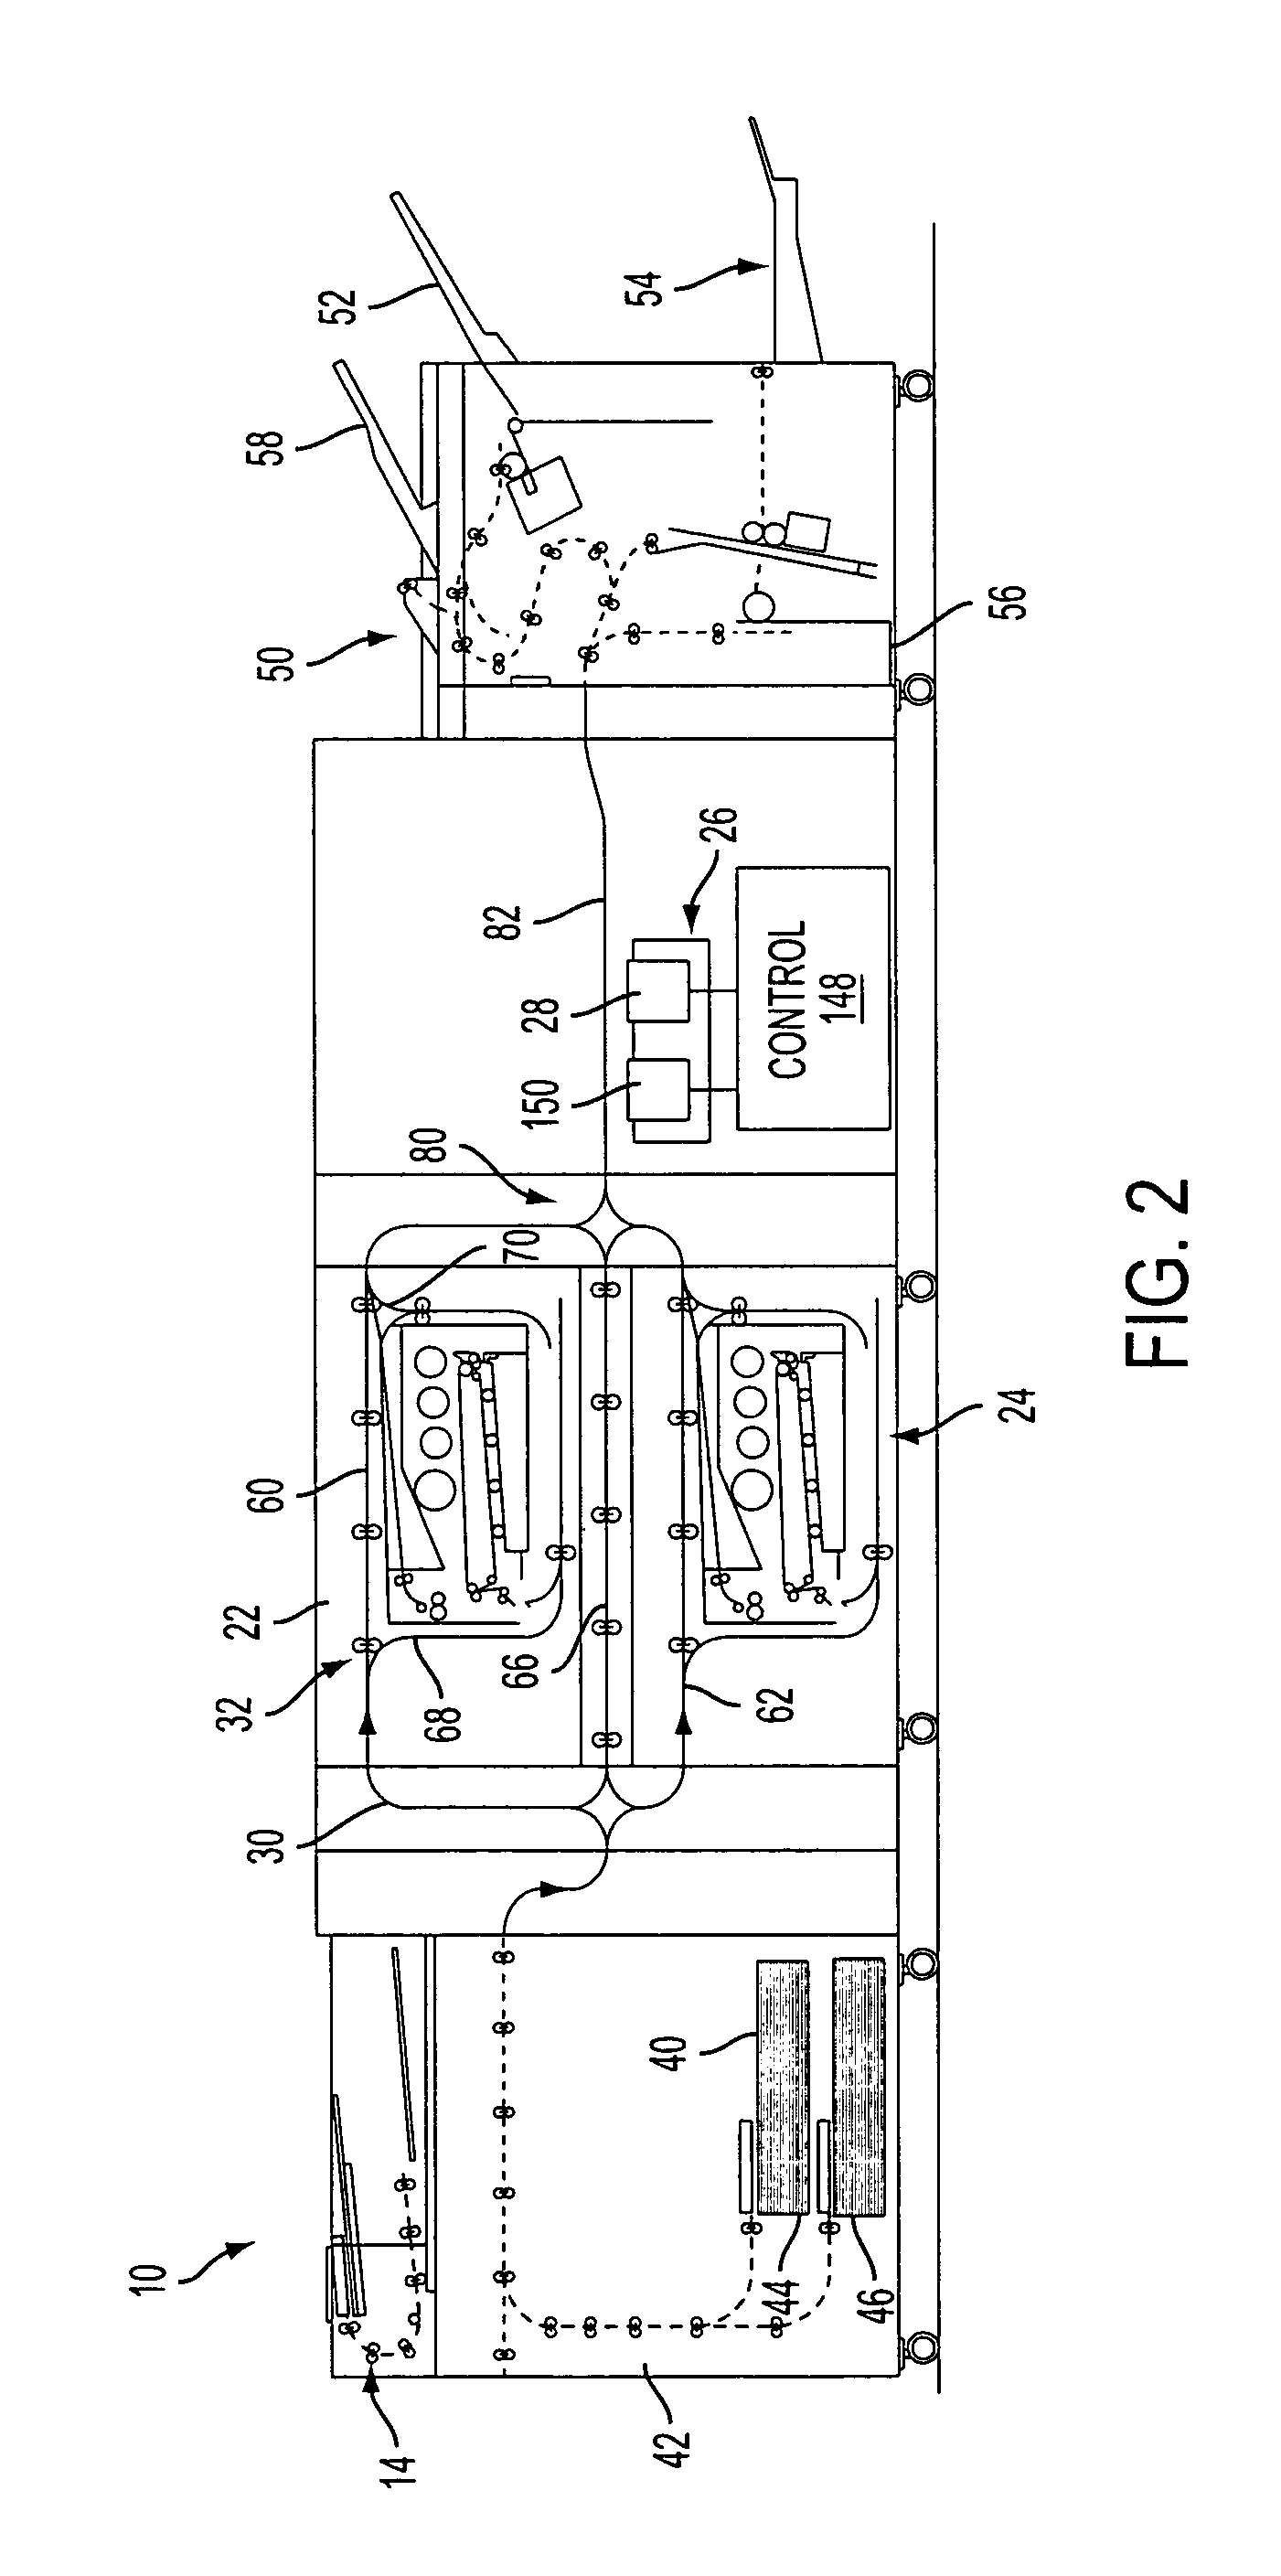 Gray balance for a printing system of multiple marking engines